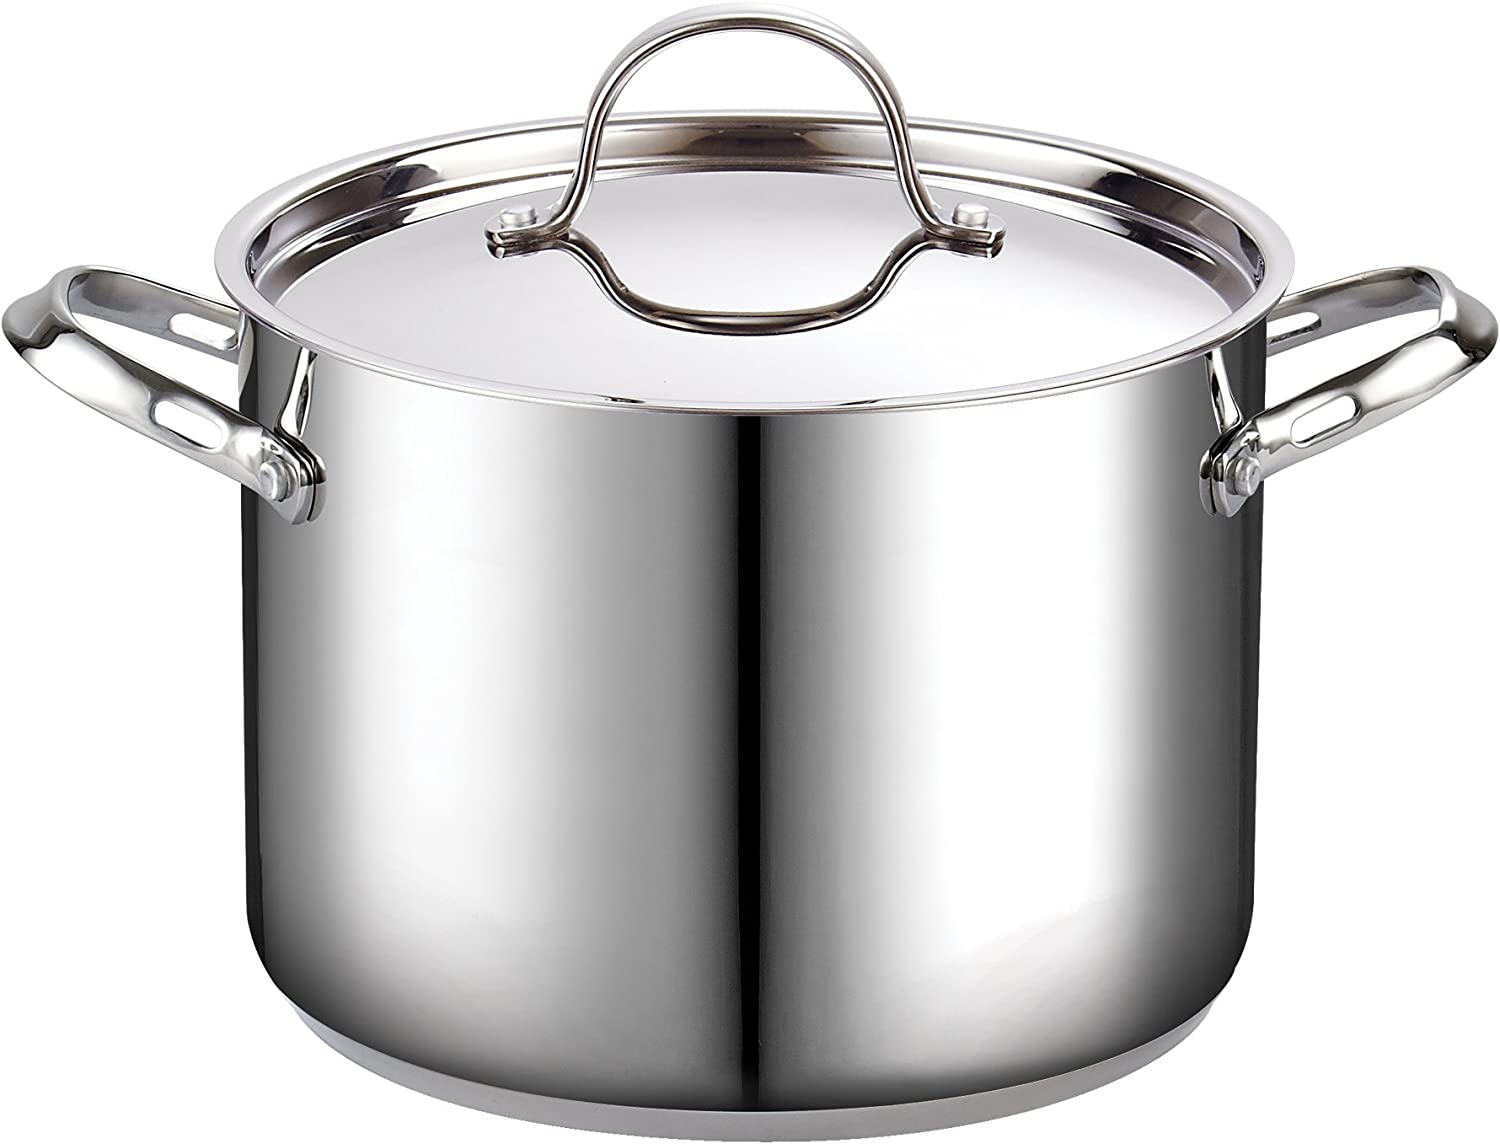 Safe Stockpot with Lid